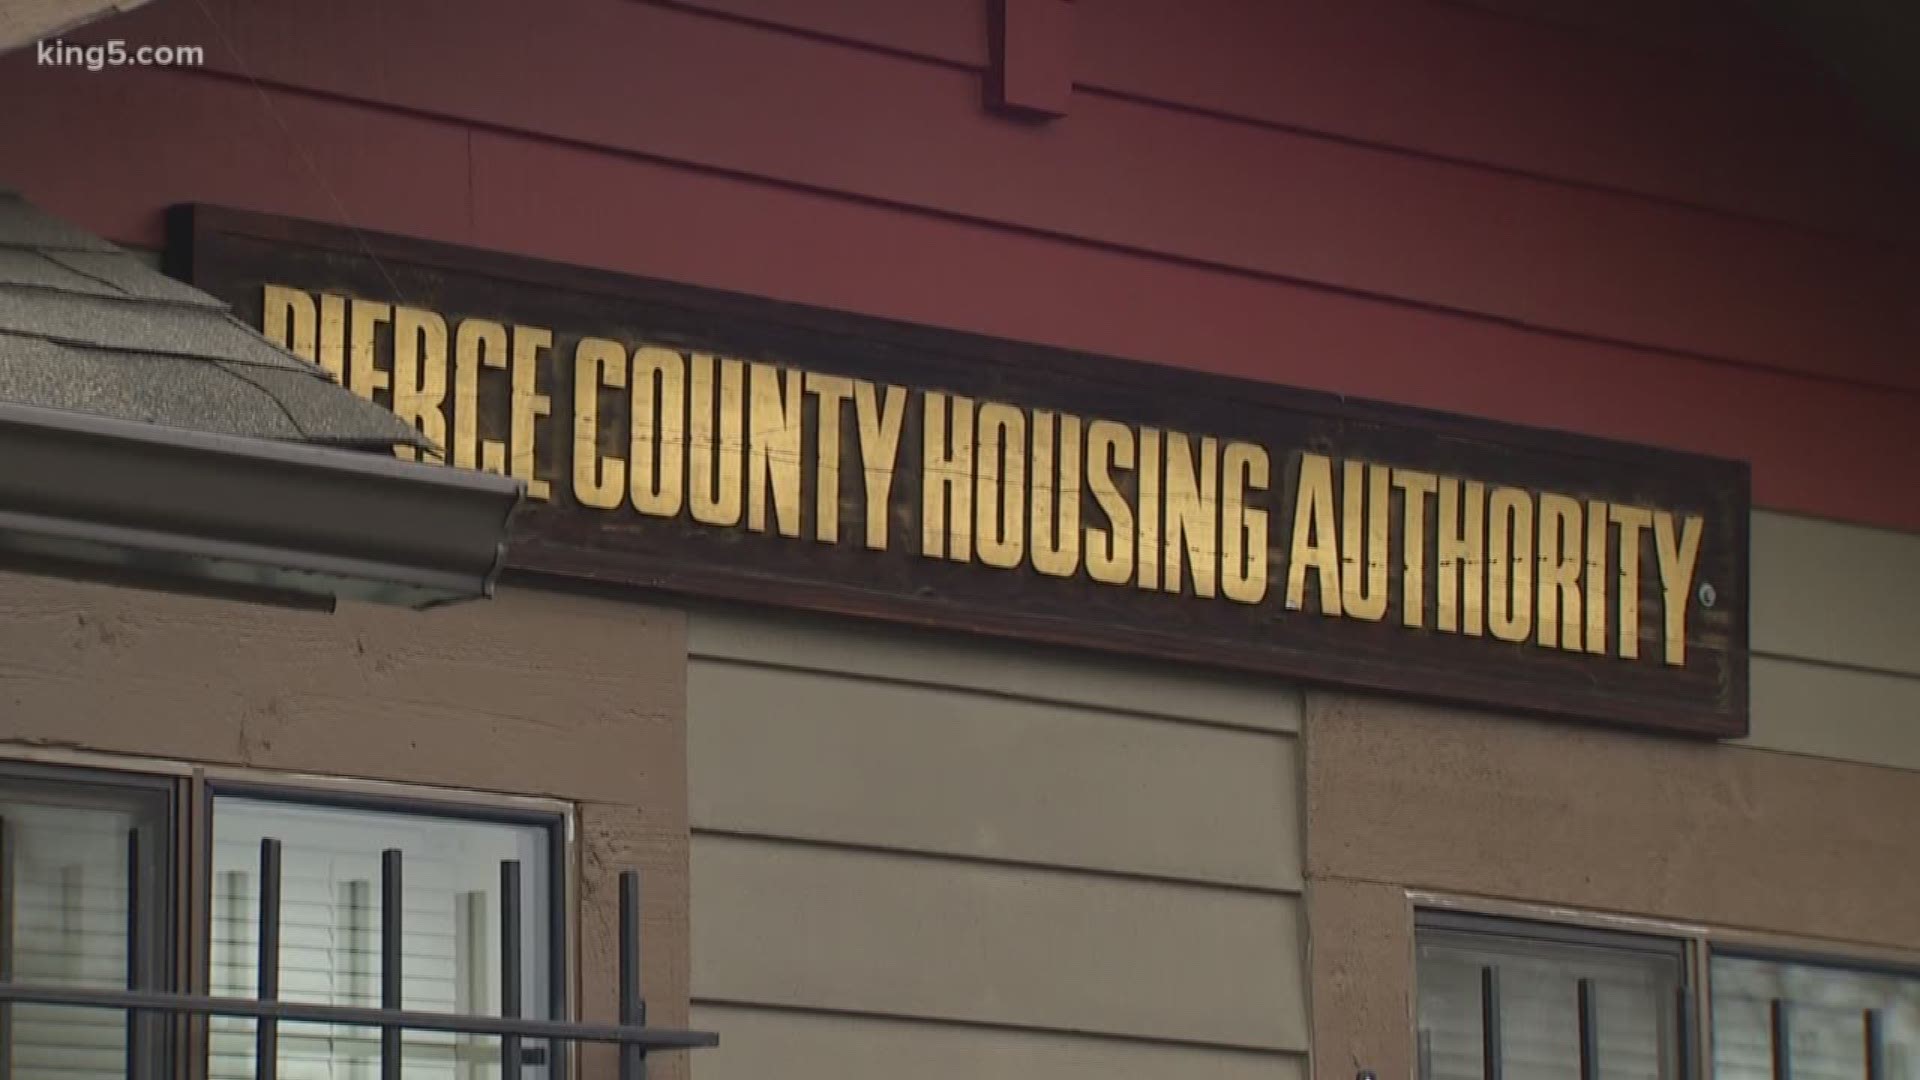 The Washington State Auditor says the former finance director allegedly began defrauding the housing authority in 2016, misappropriating more than $6.9 million.